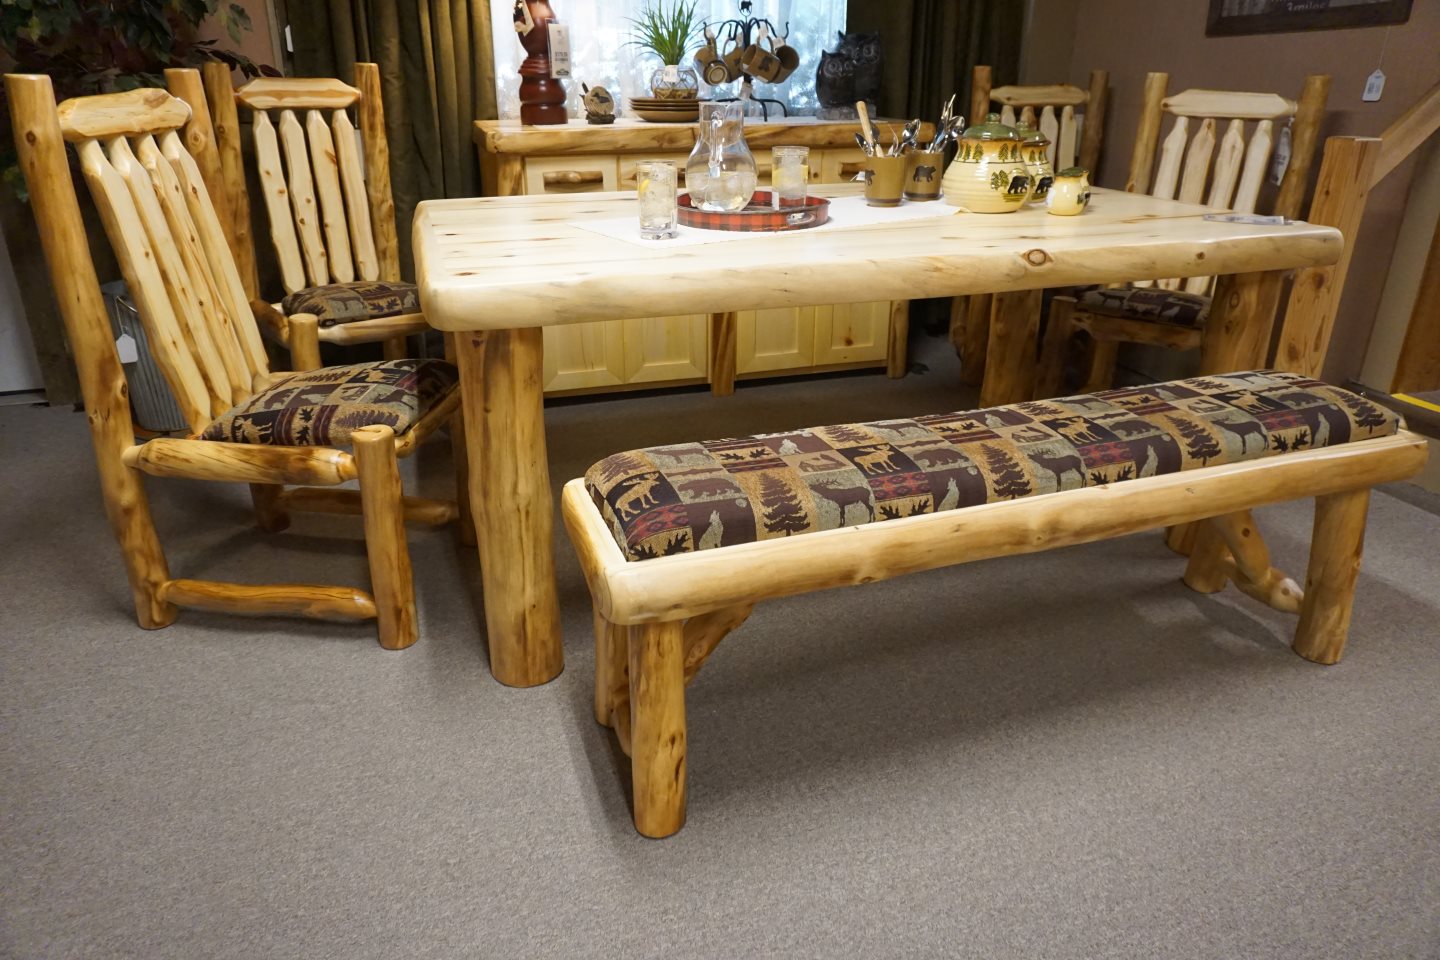 Rustic Log - Aspen Wood Dining Table & Chairs